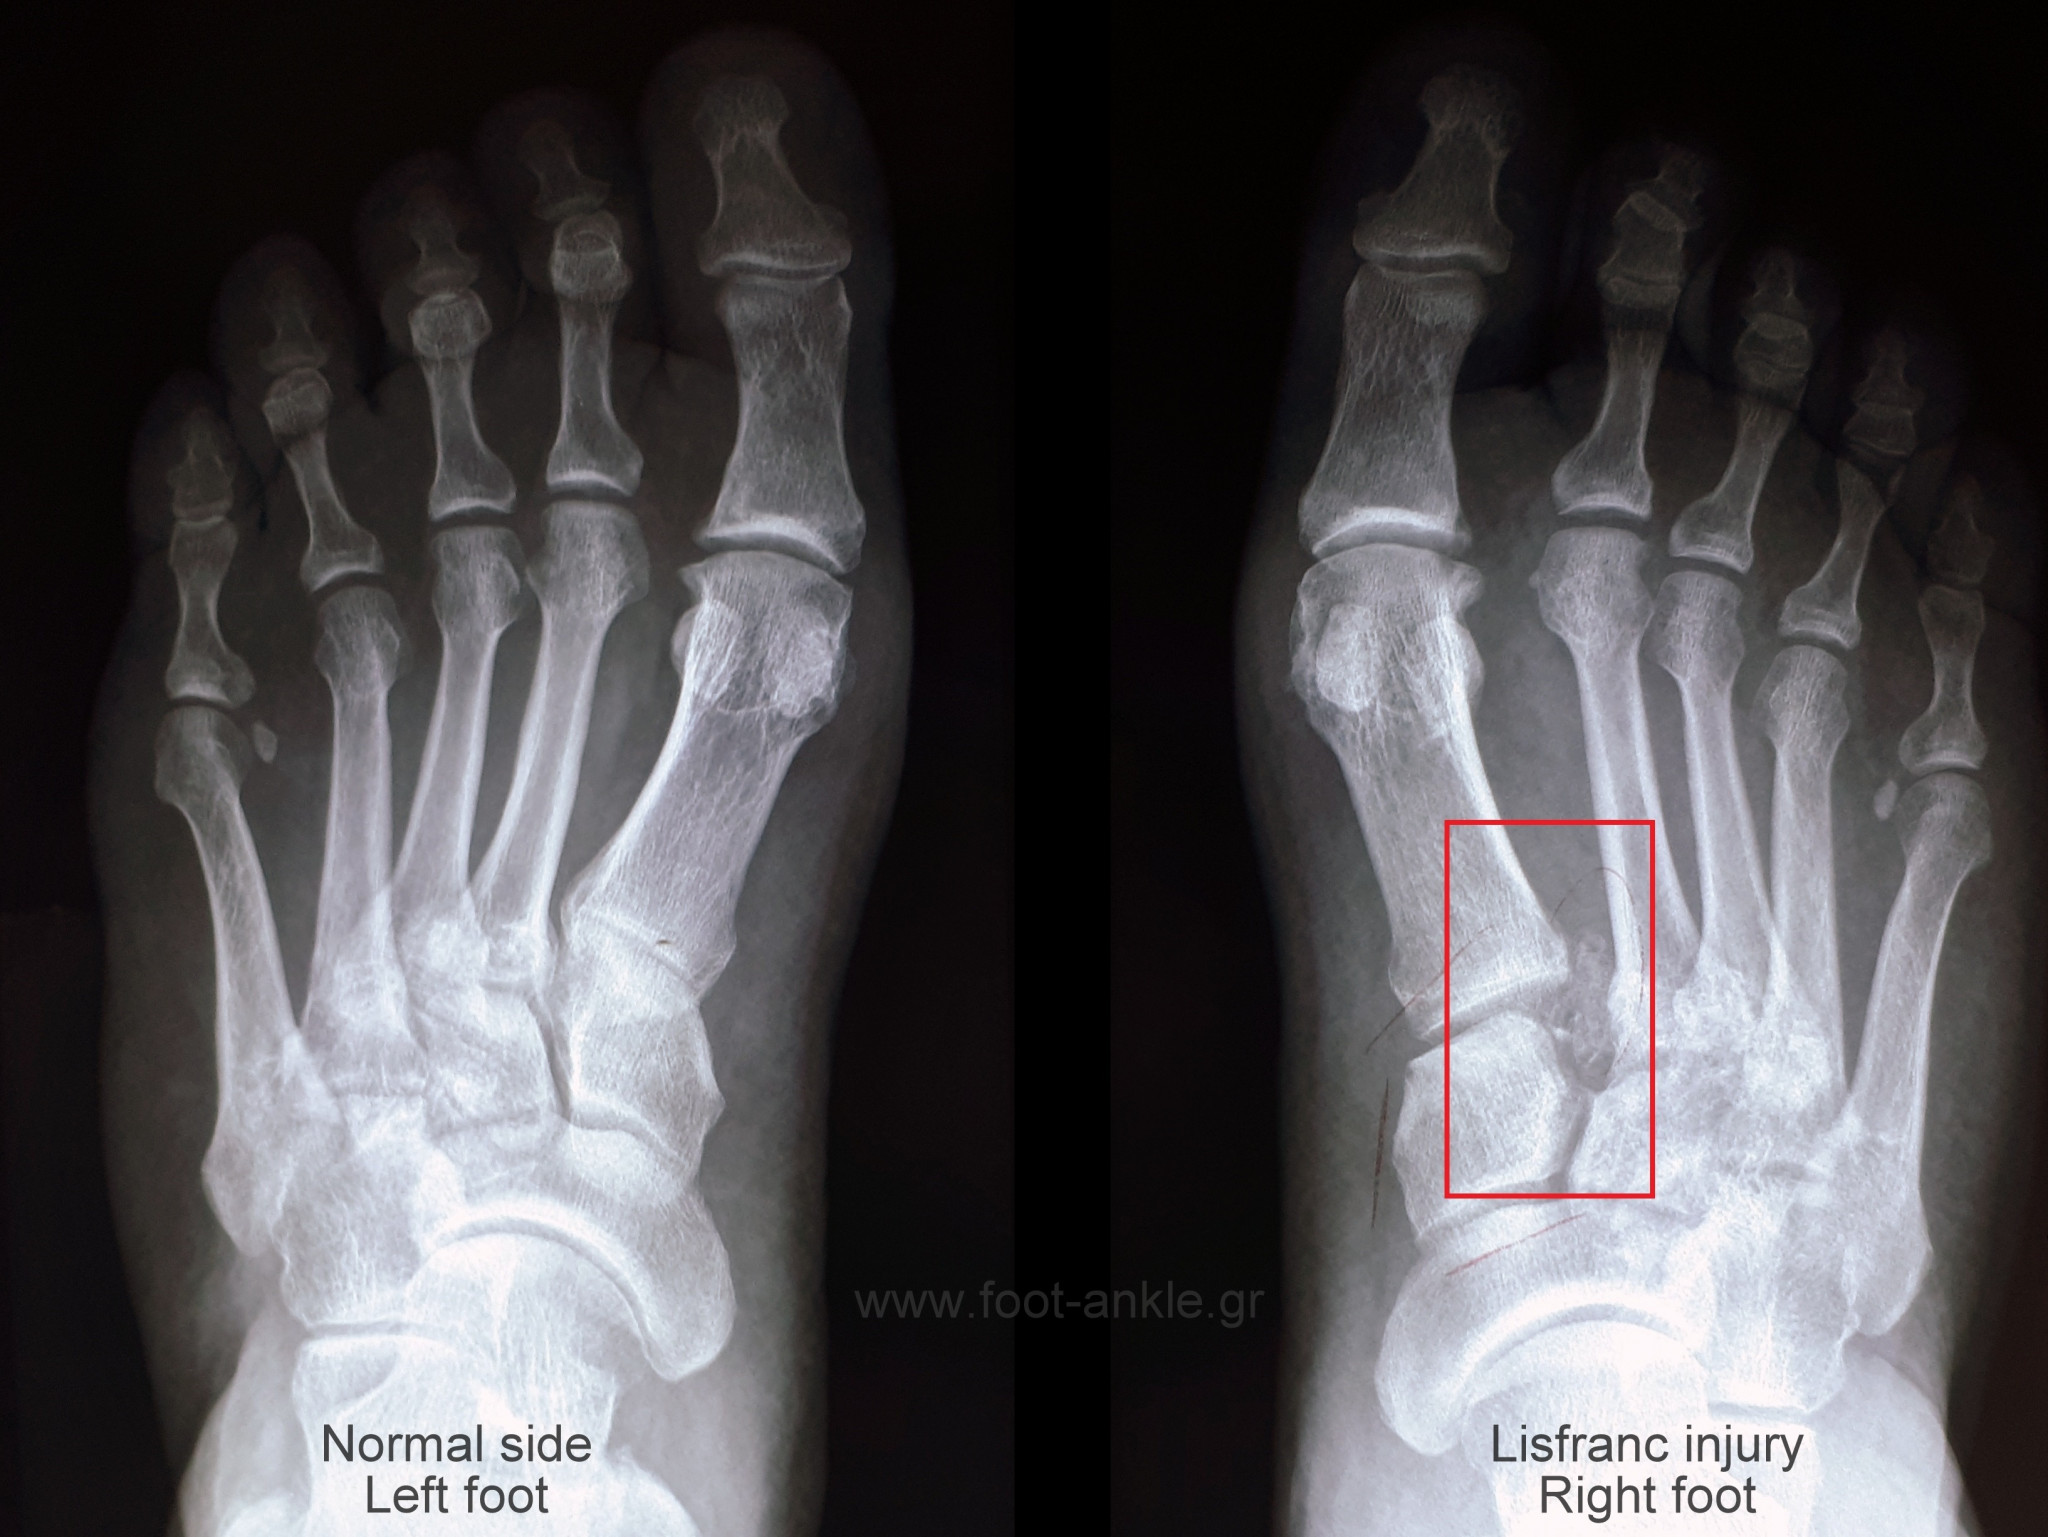 Lisfranc injury. Comparative weight bearing radiographs XRays showing a Lisfranc injury of the right foot (red box)